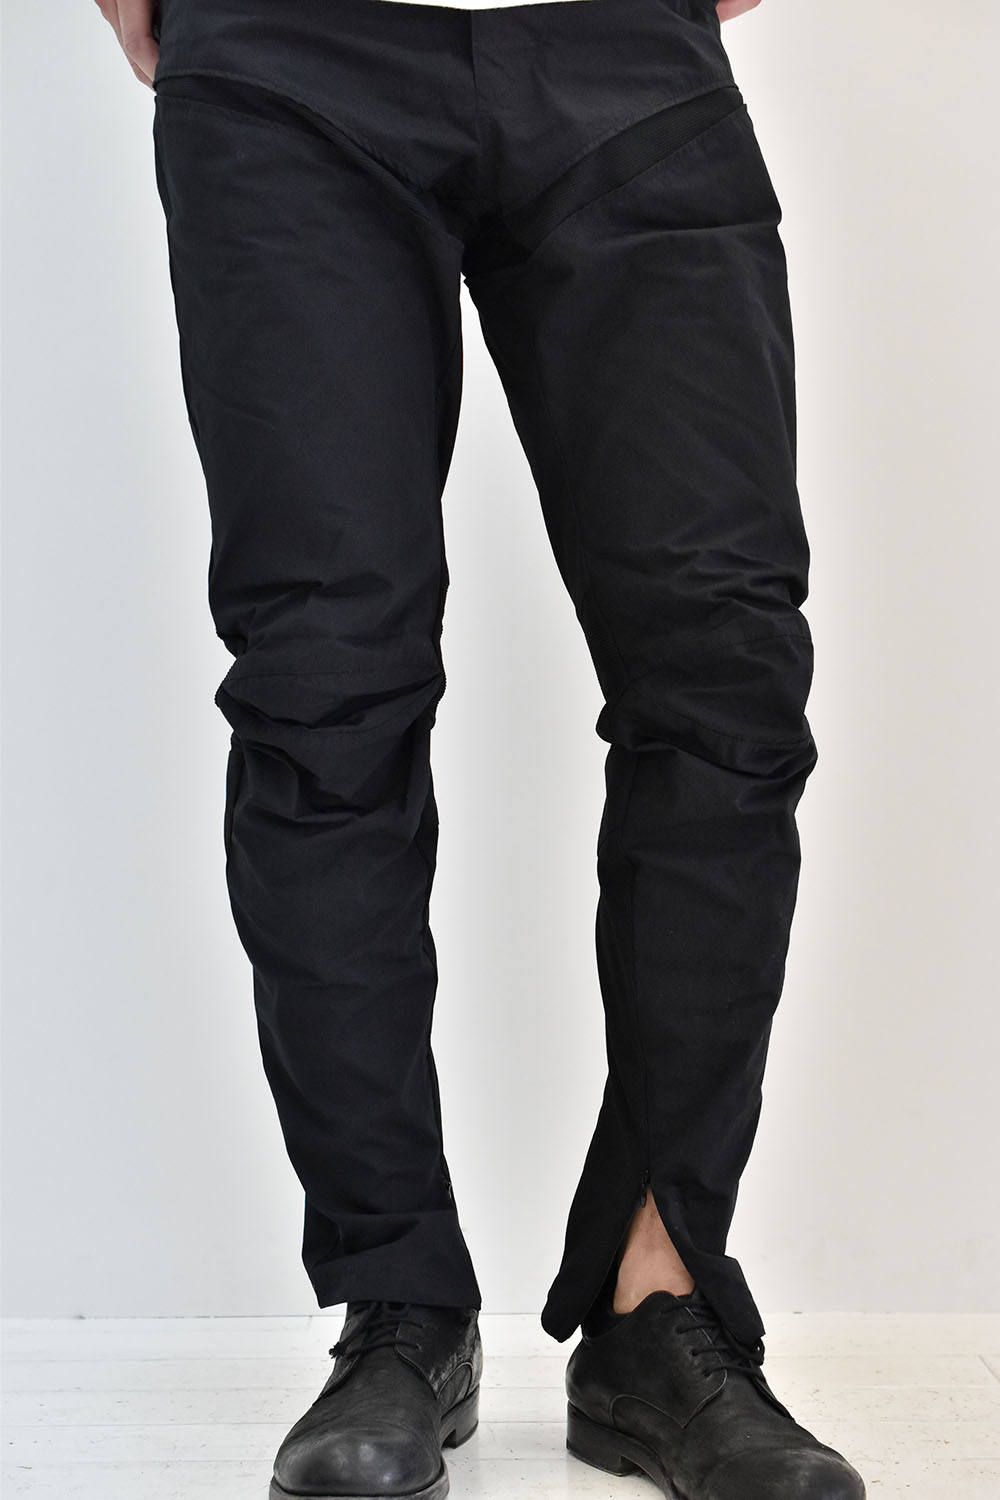 CIVILIZED - ARTICULATED PANTS. | ALTRA